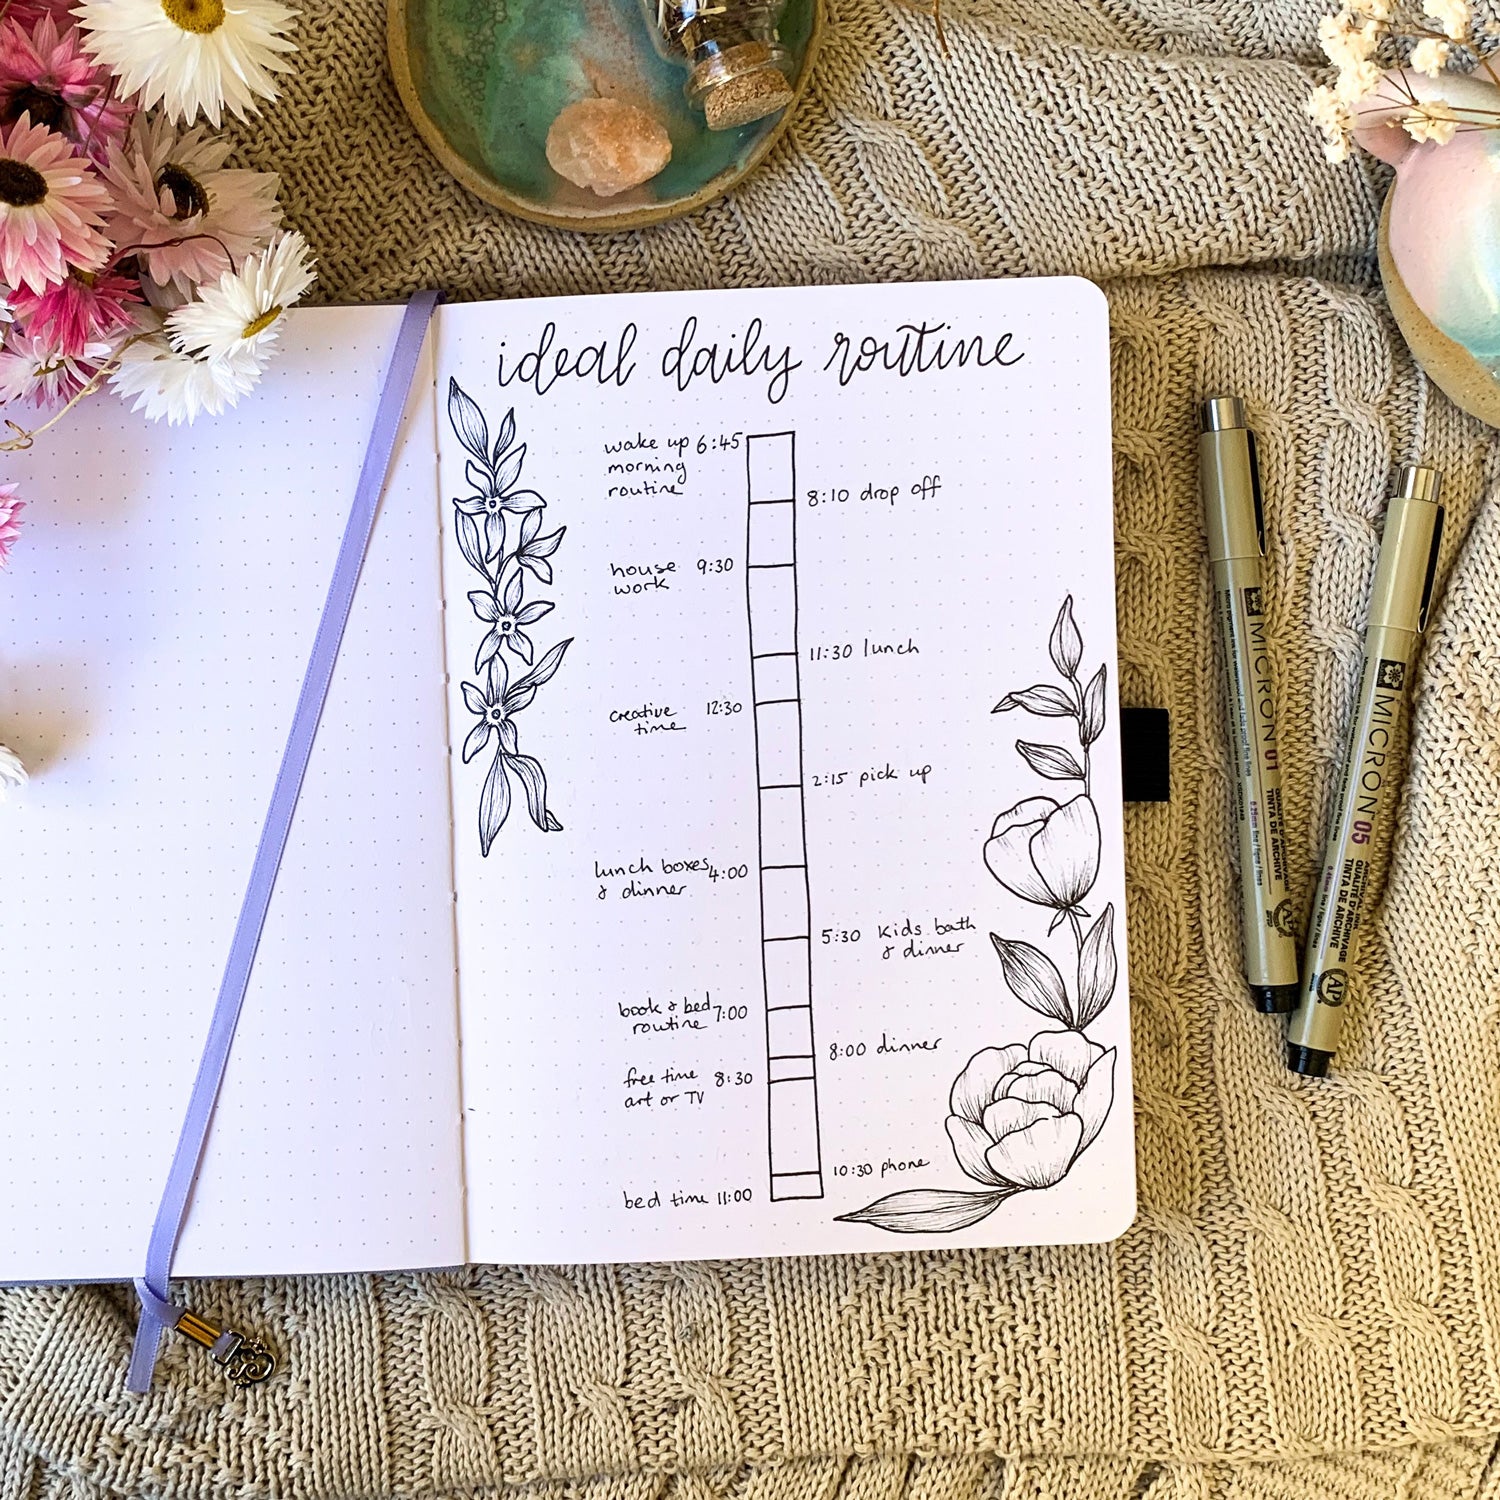 full routine spread with timeline and activities at each time